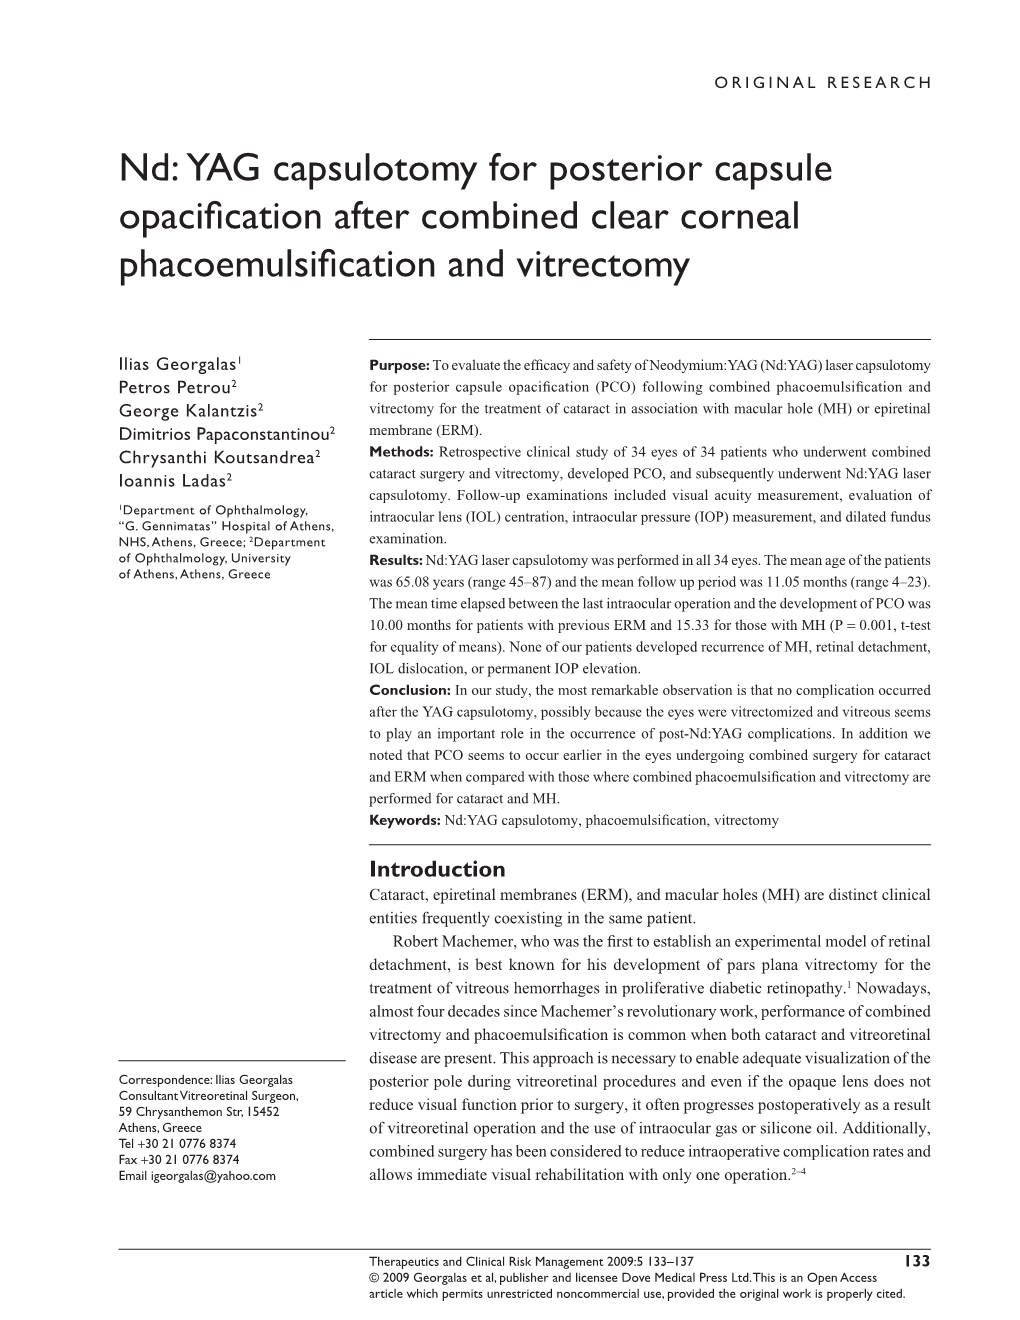 Nd: YAG Capsulotomy for Posterior Capsule Opacification After